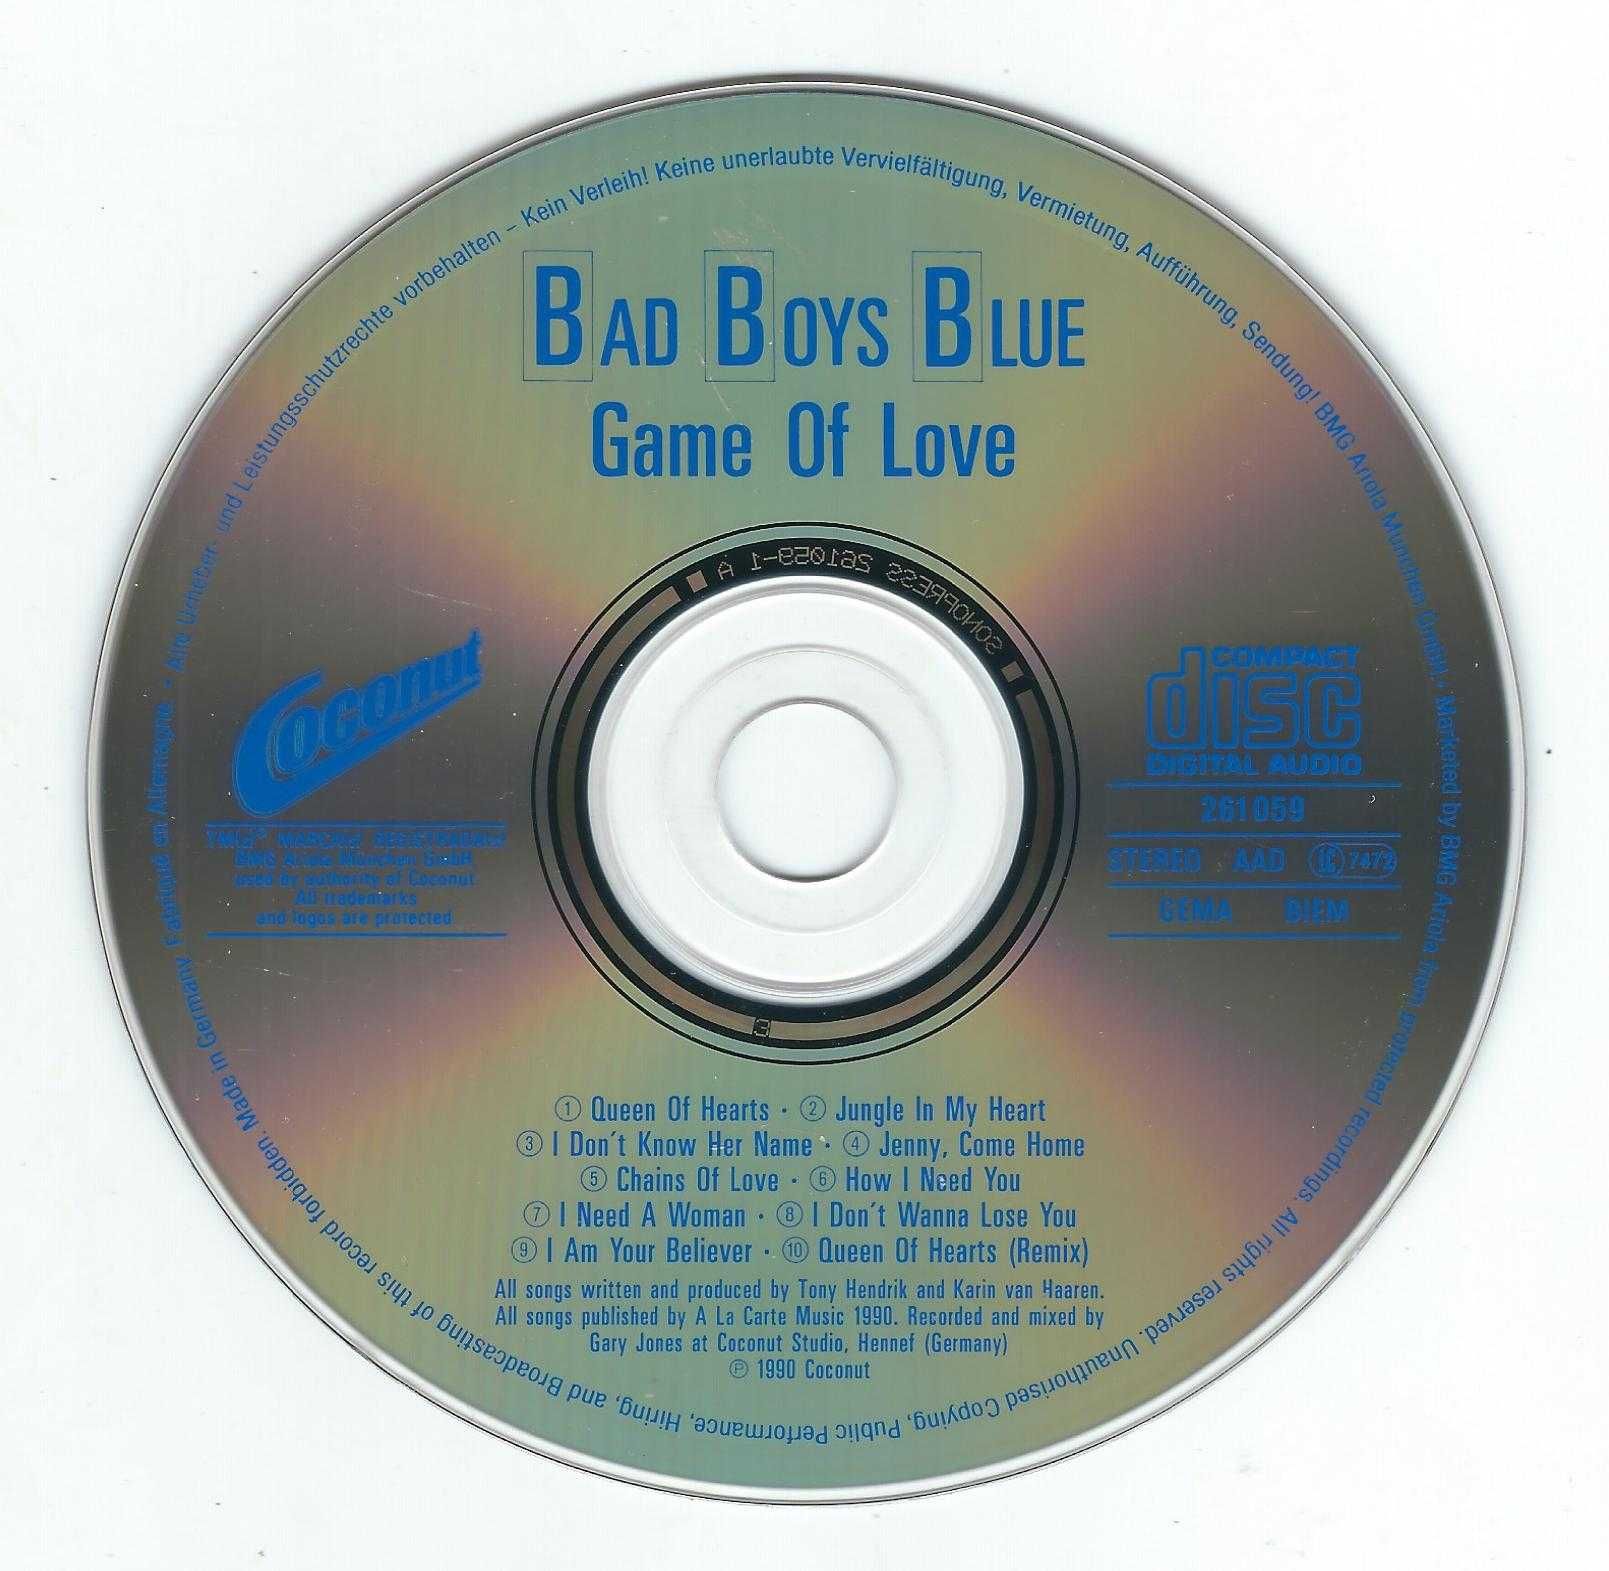 CD Bad Boys Blue - Game Of Love (1990) (Coconut)